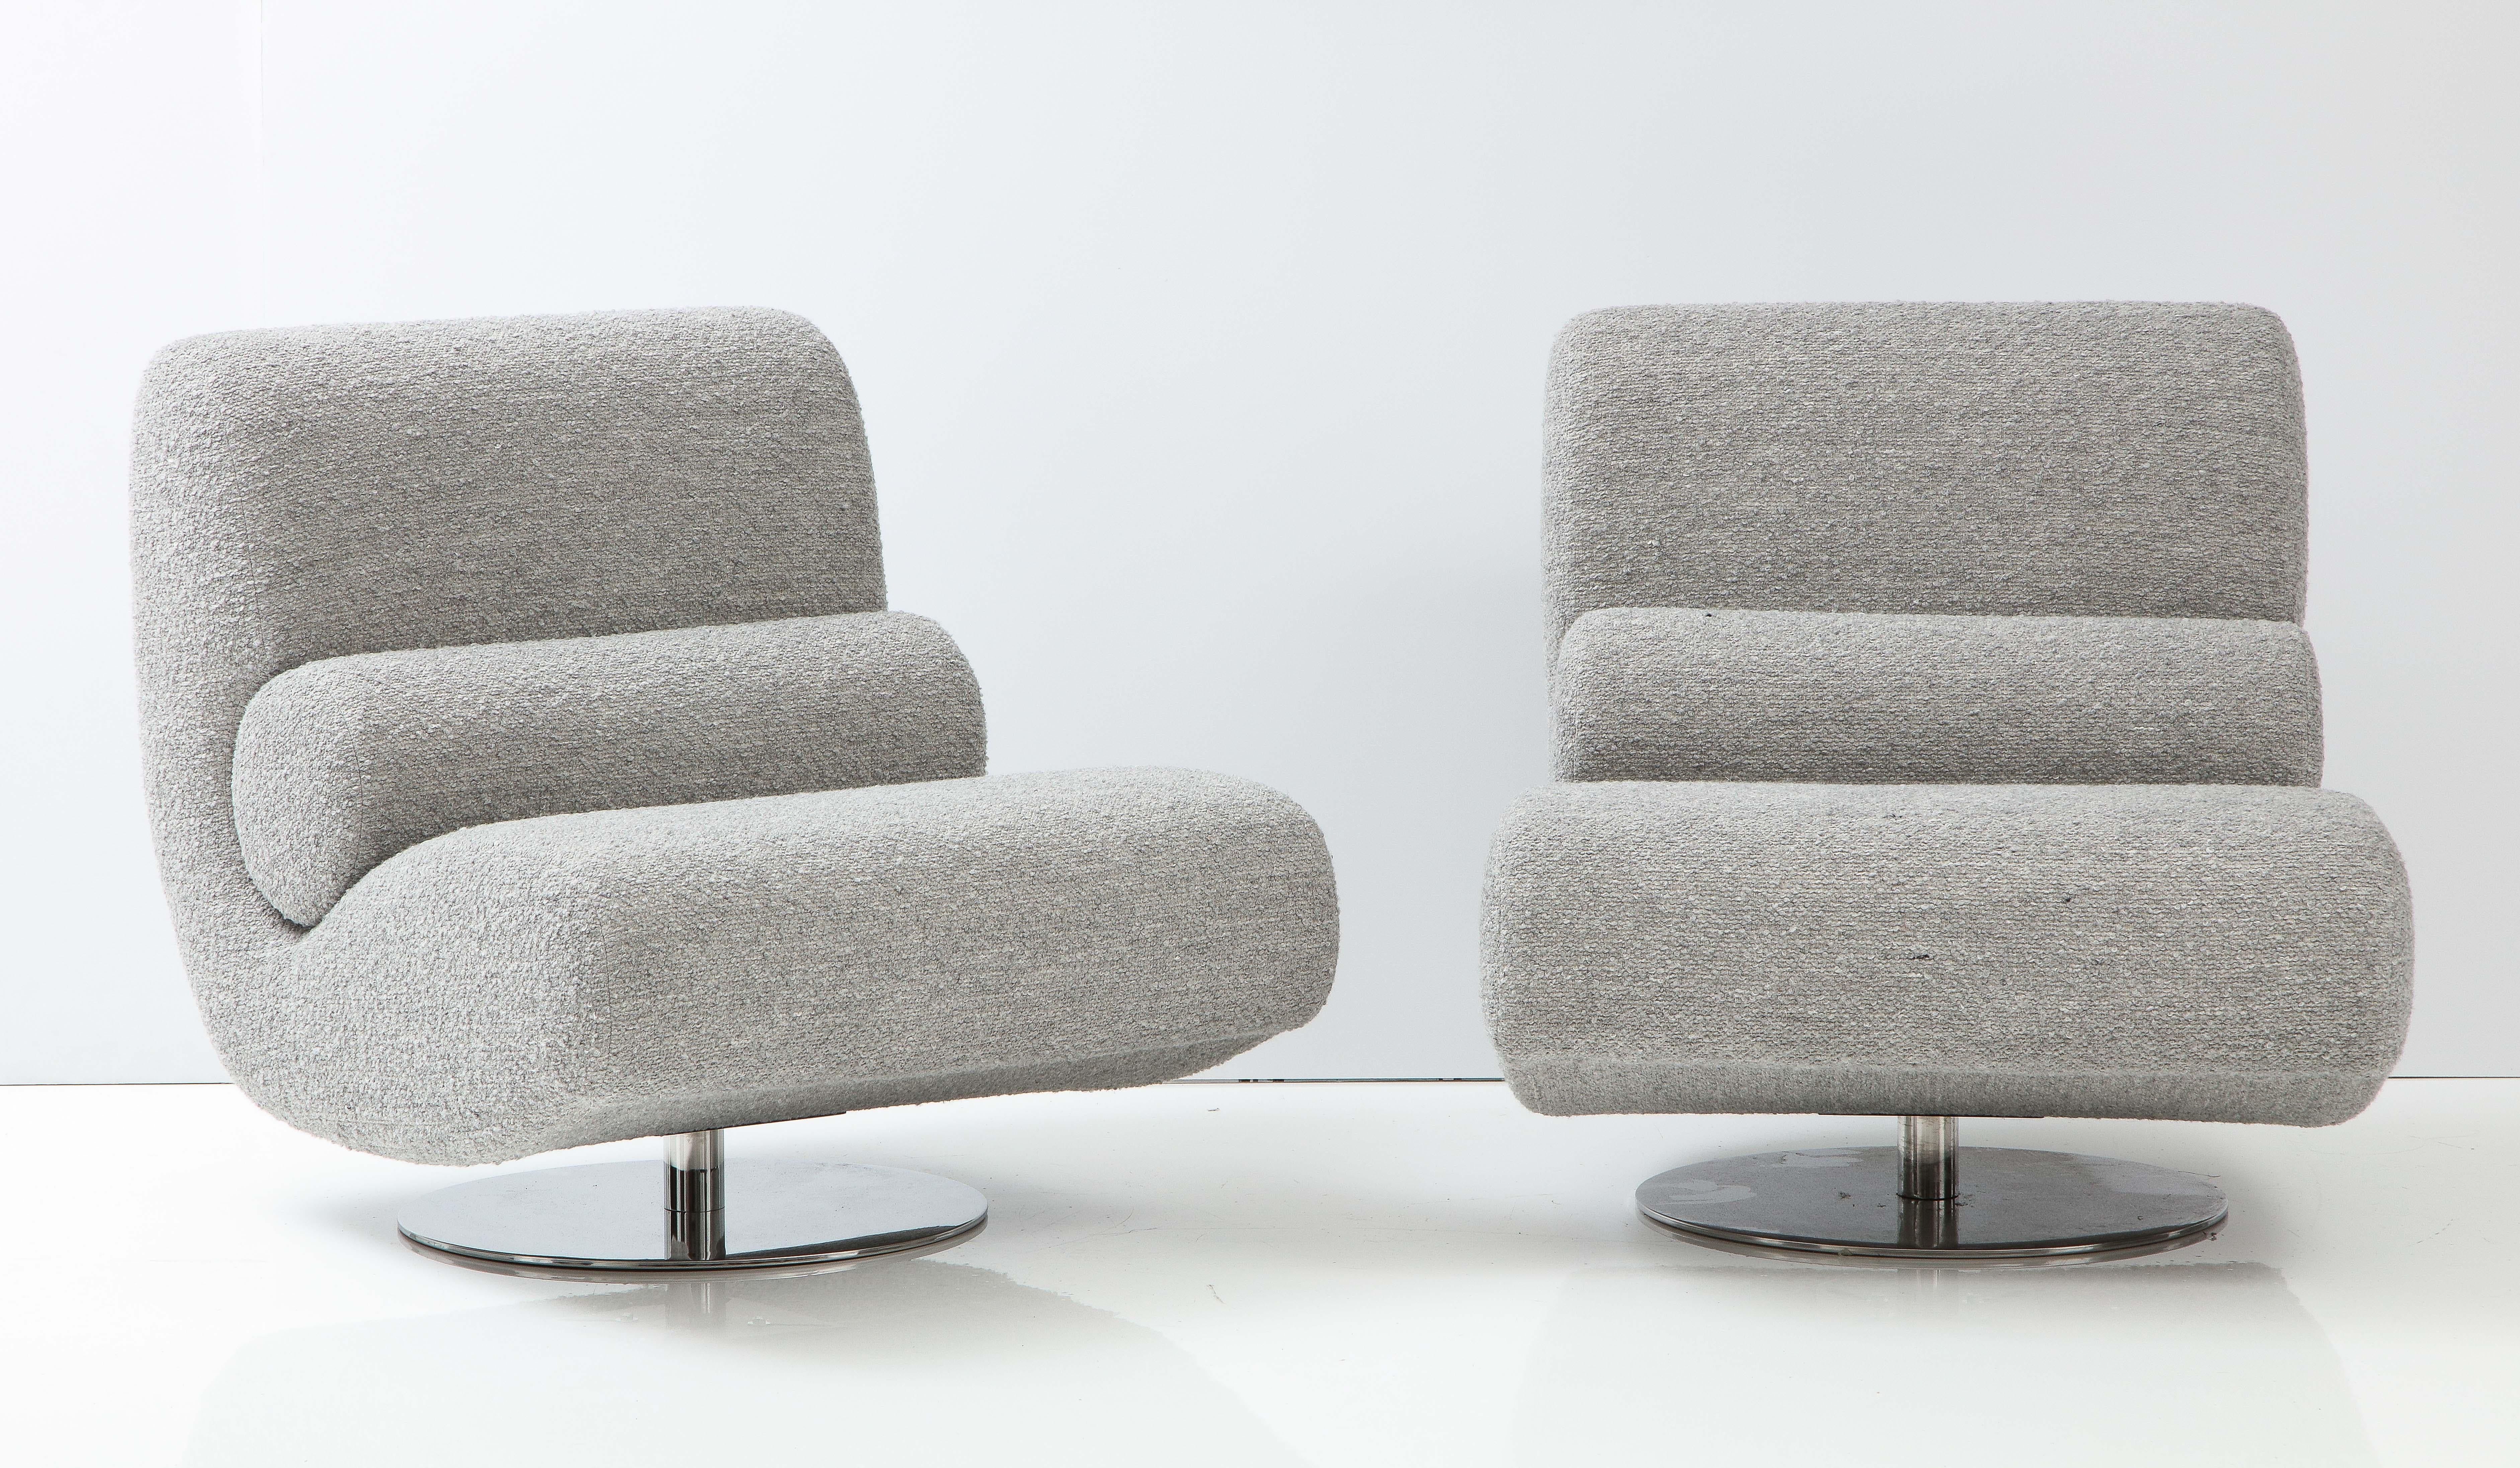 Large and substantial pair of grey bouclé sculptural, swivel lounge chairs or slipper chairs custom made in Florence, Italy. Superb craftsmanship and design lines. These large and roomy lounge chairs are extremely comfortable and sit atop a round